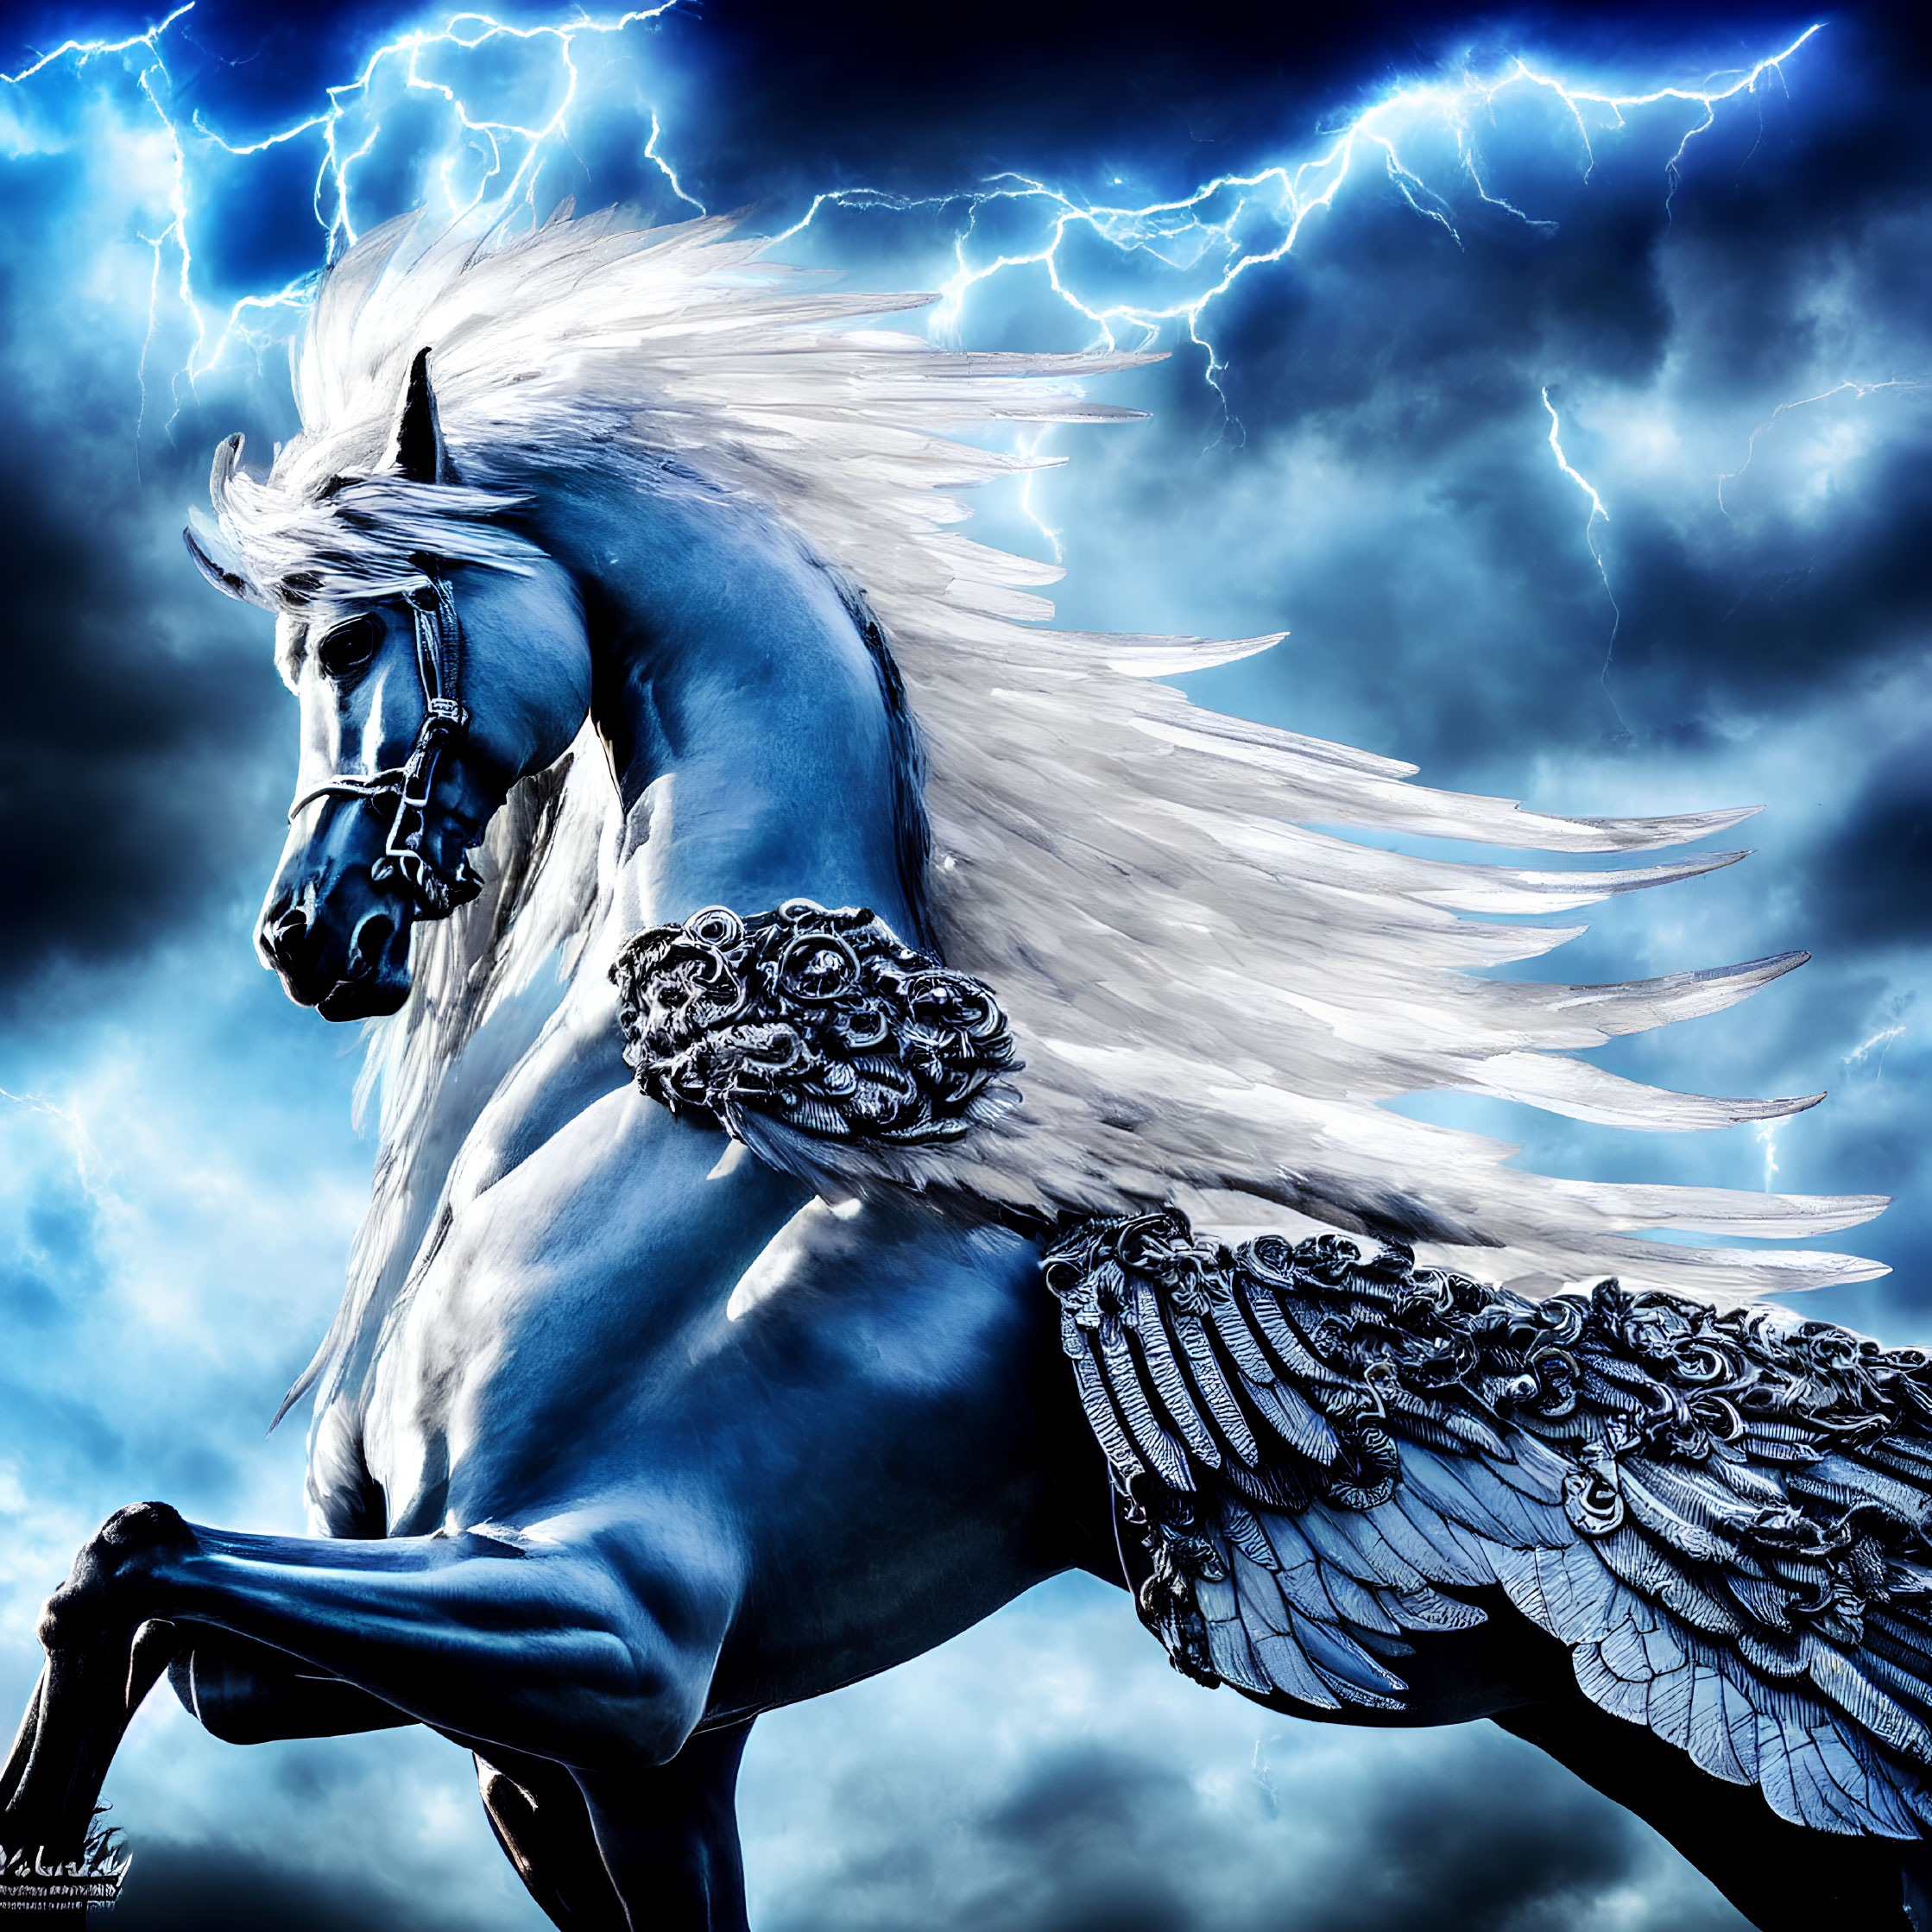 Majestic winged horse with white mane under dramatic sky with lightning bolts